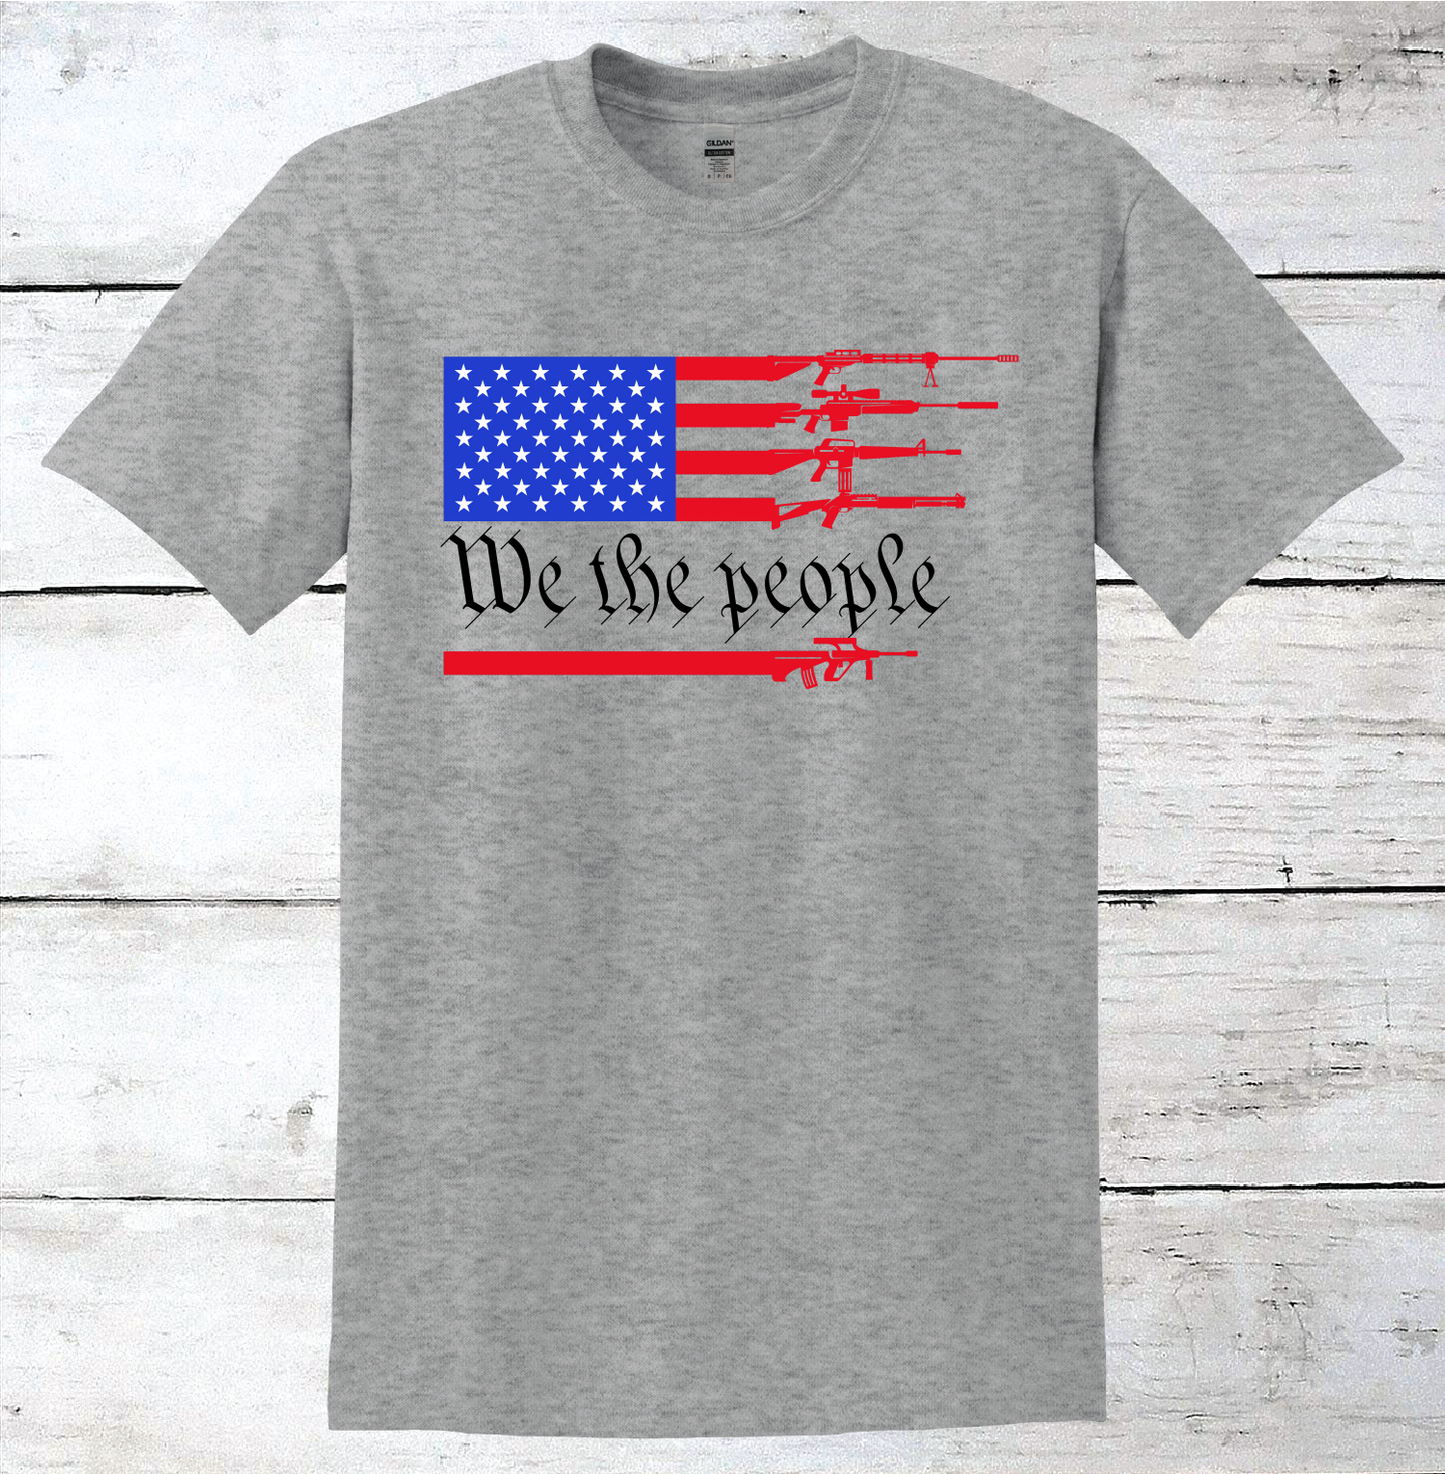 We The People Rifle American Flag T-Shirt